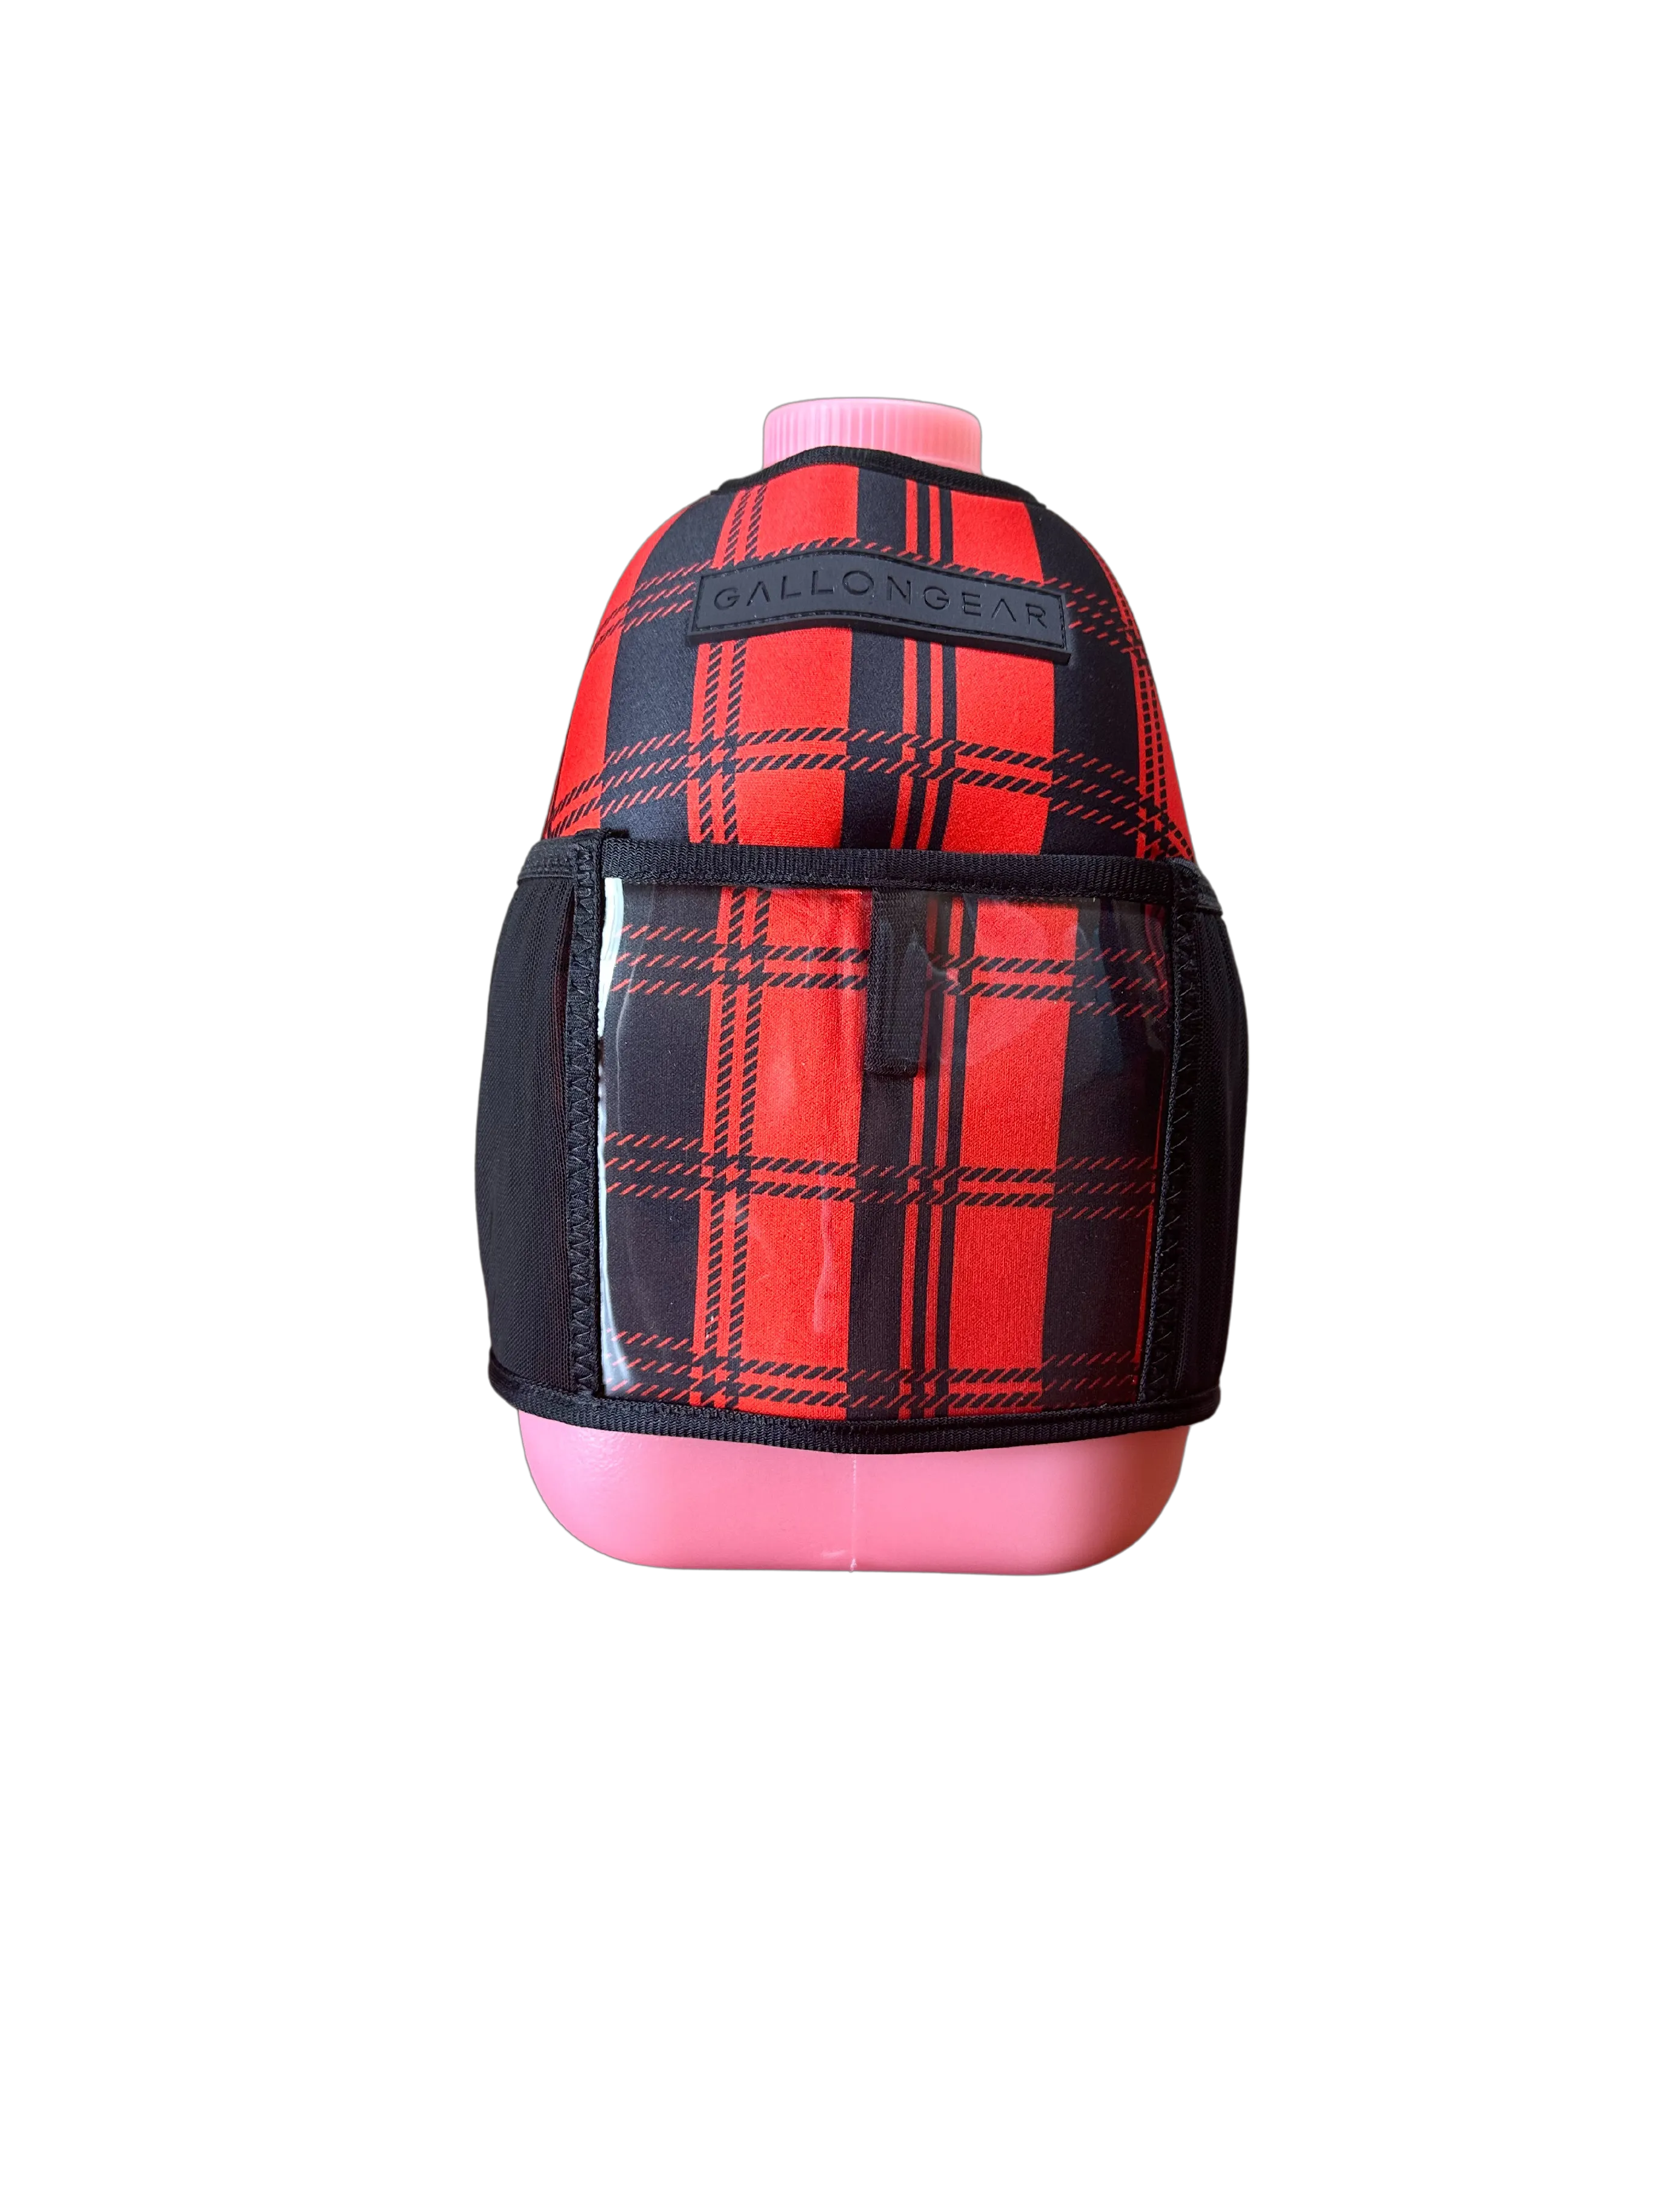 (1 GALLON COMBO) Pink Jug / Red Plaid Booty